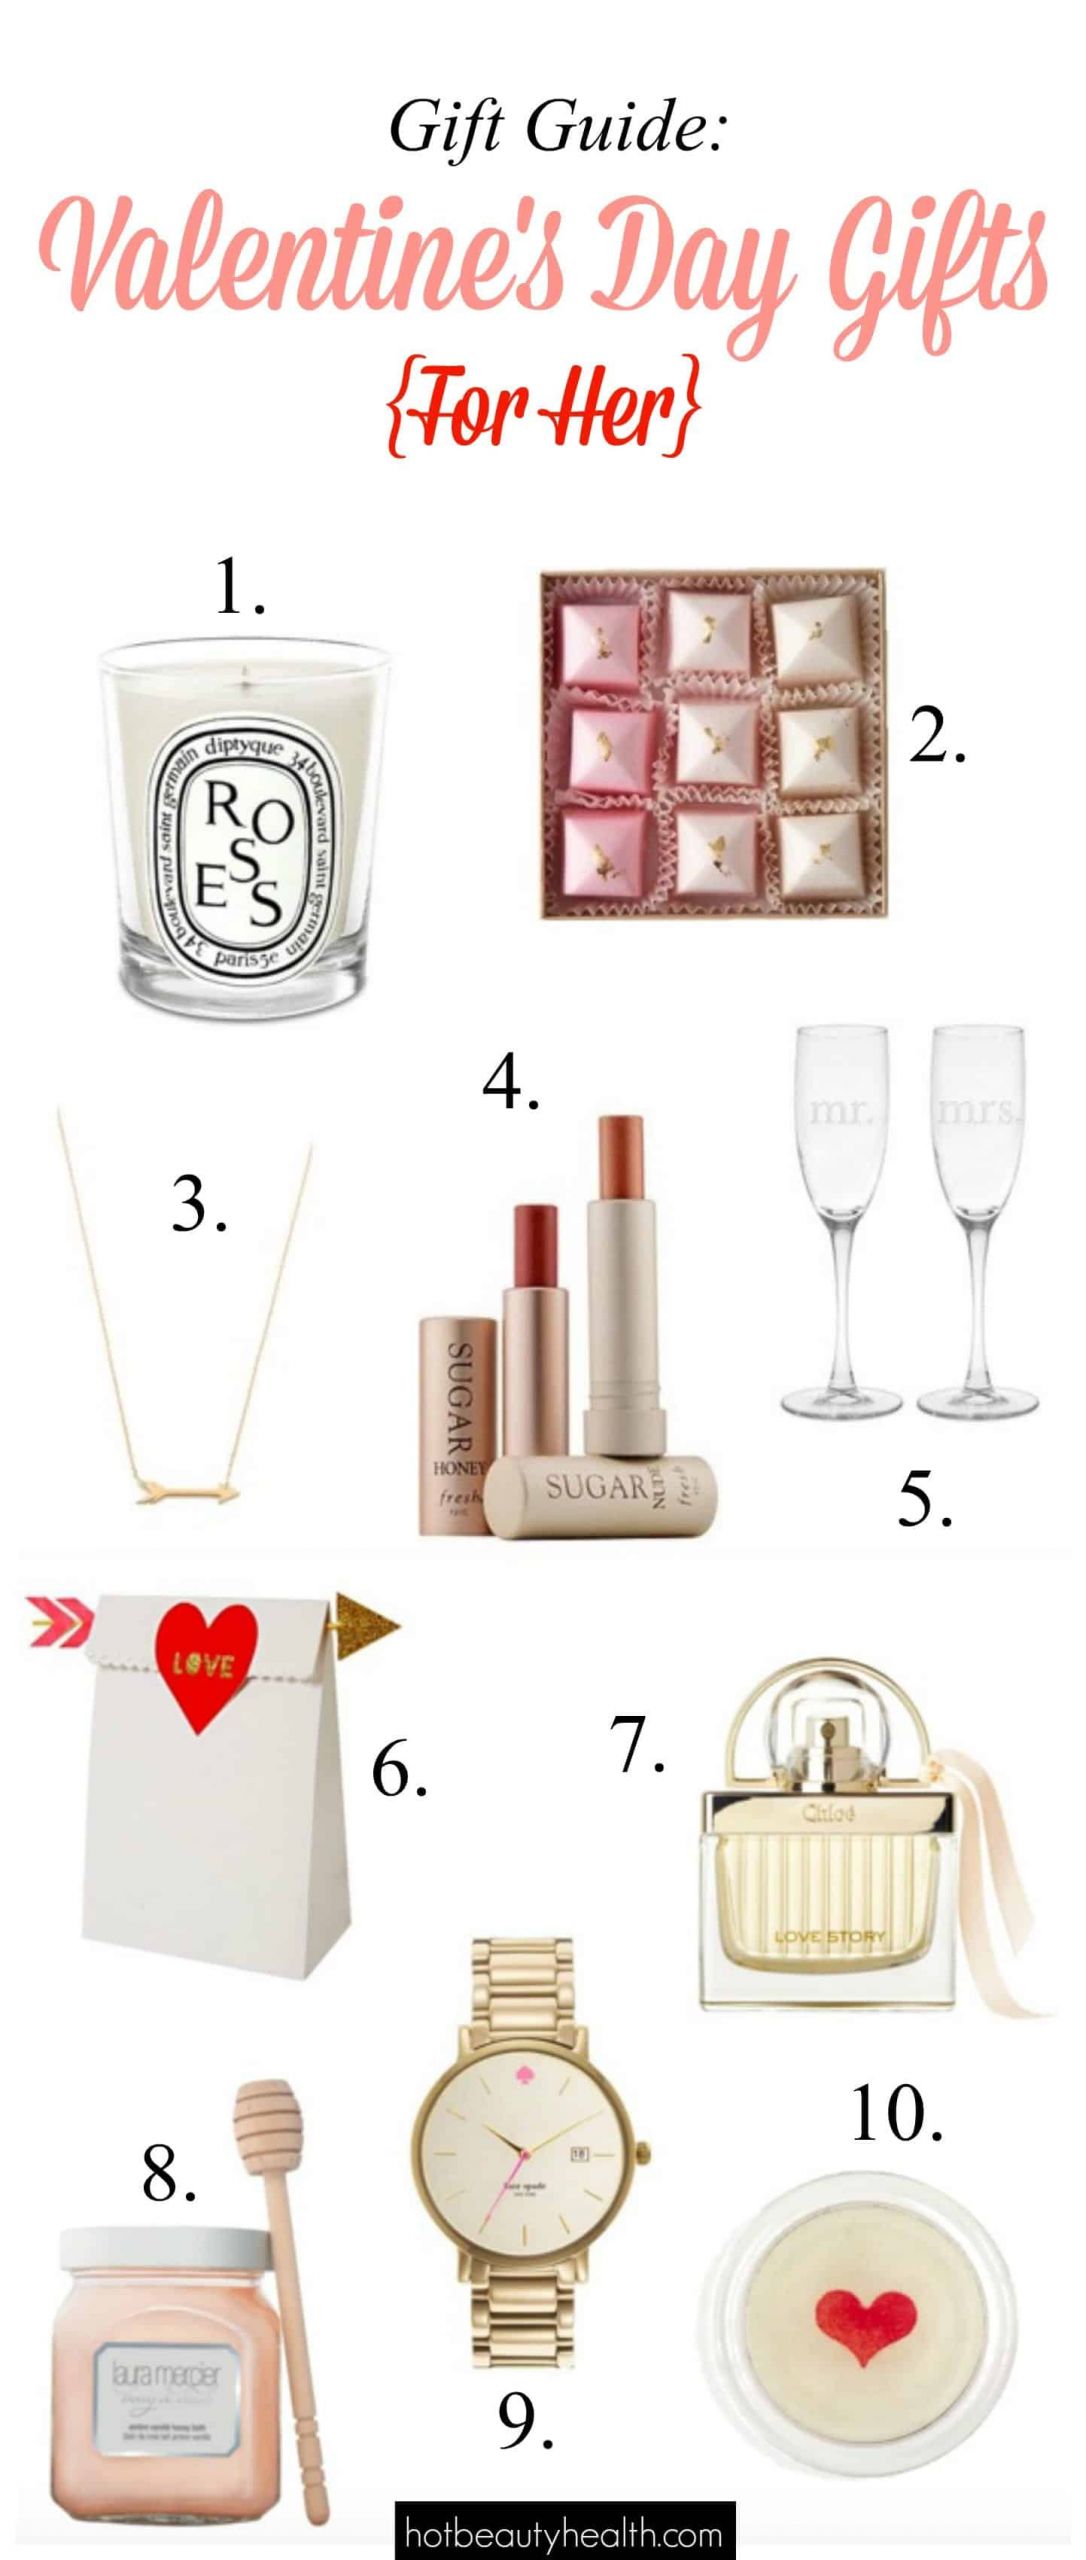 Cute Valentine Gift Ideas For Her
 10 Cute Valentine s Day Gifts for Her